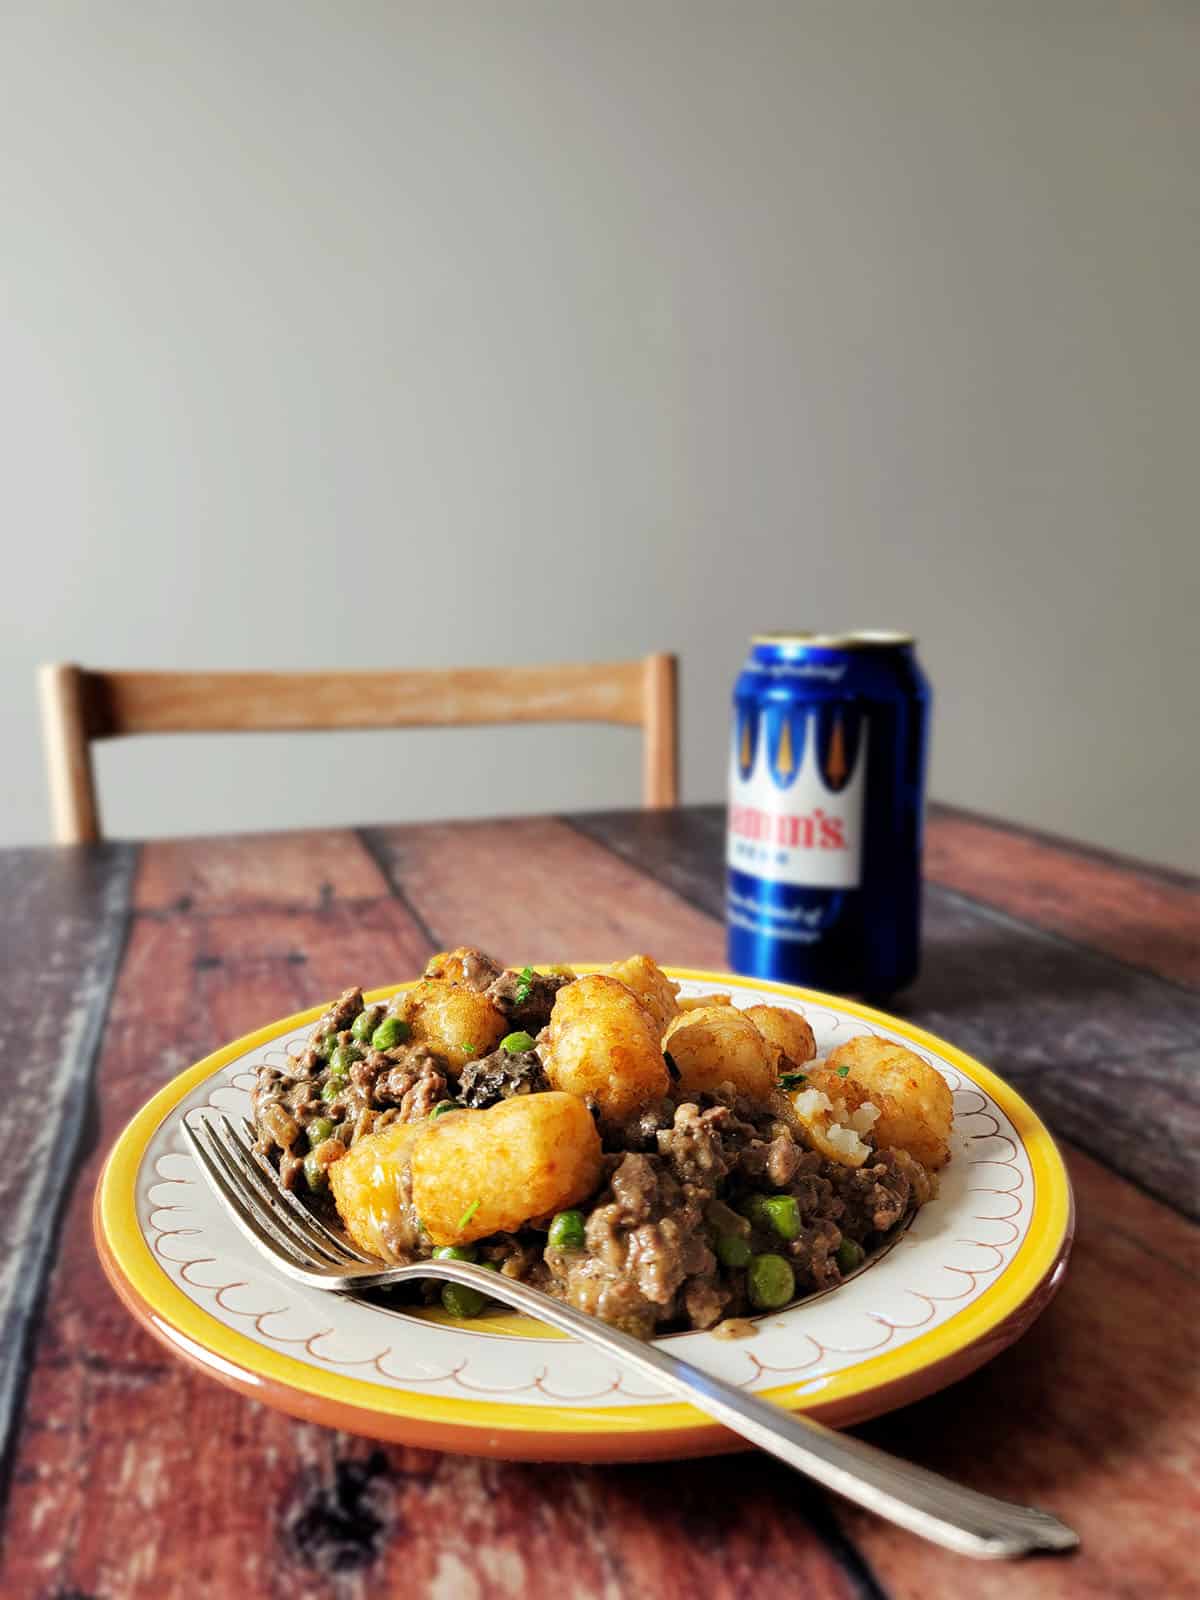 A serving of venison hotdish on a plate with a beer. 